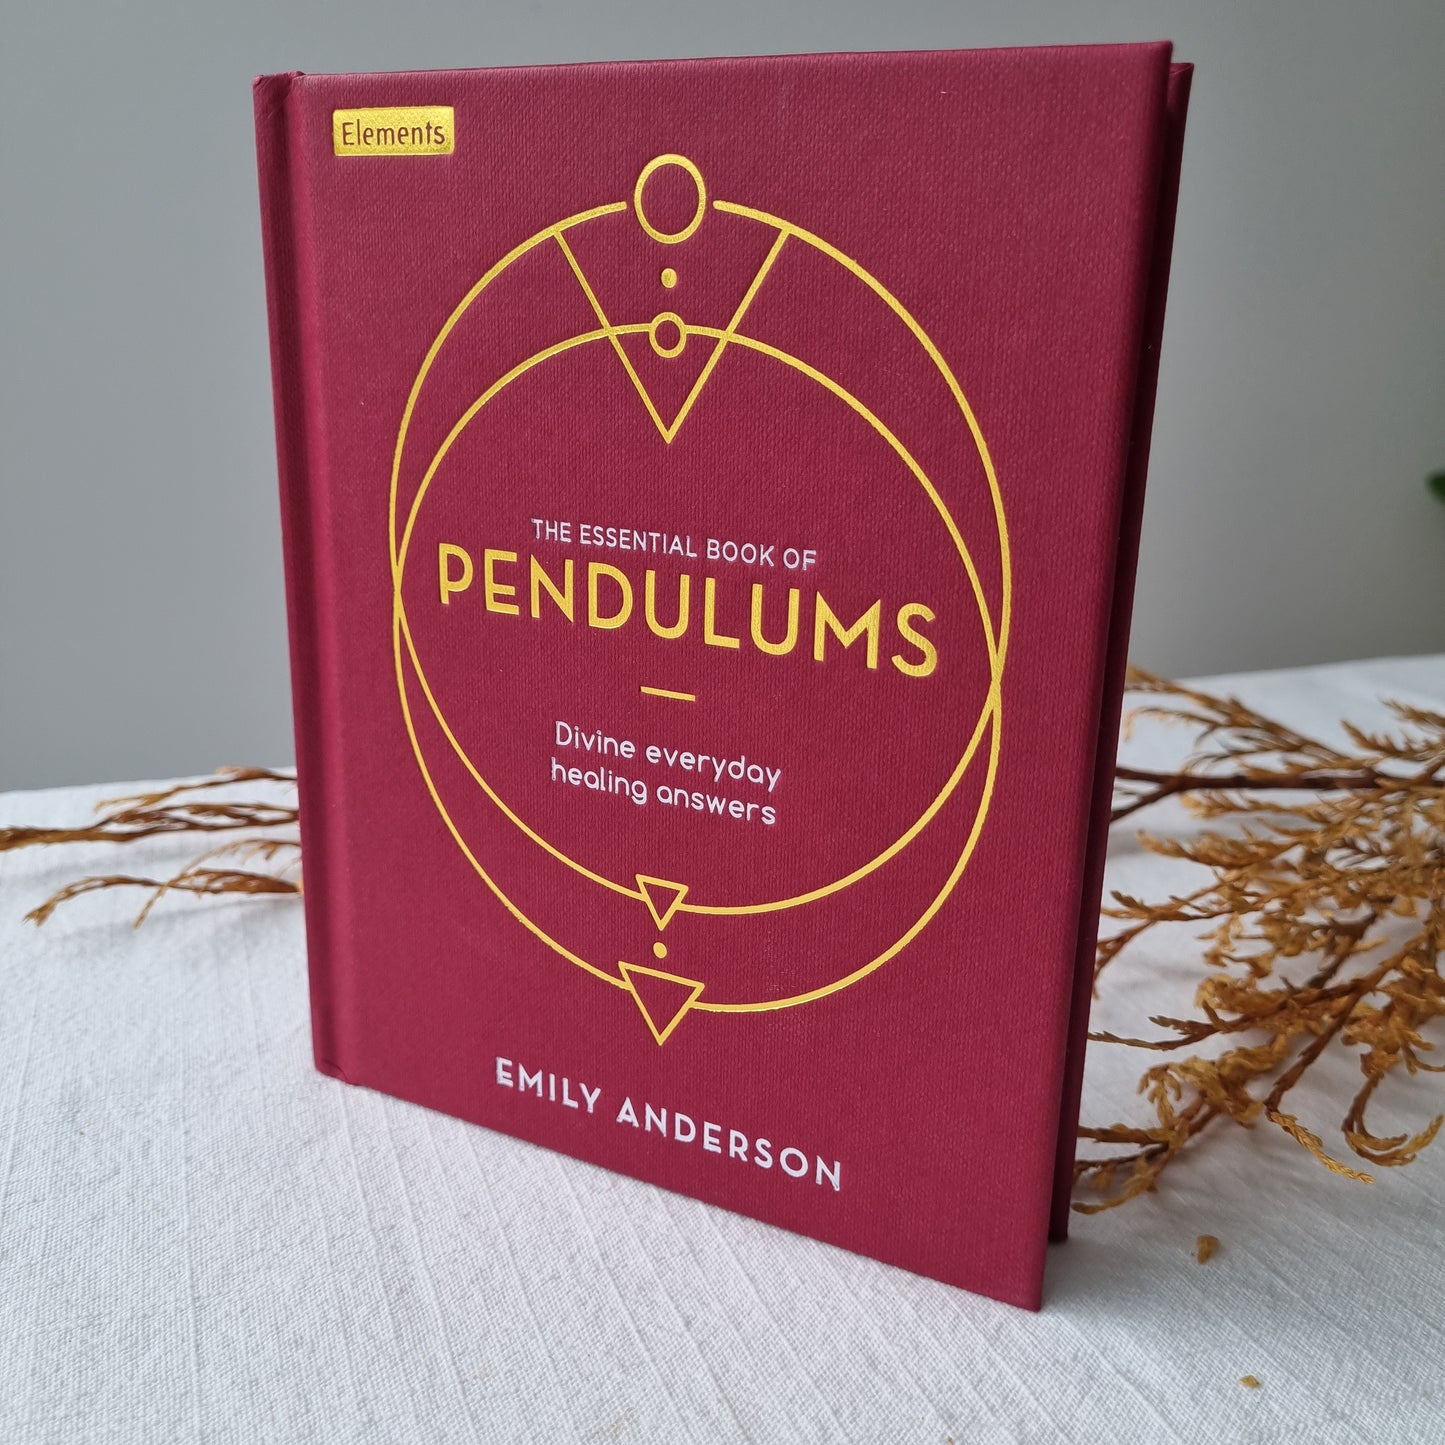 The Essential Book of Pendulums - Emily Anderson - Sparrow and Fox